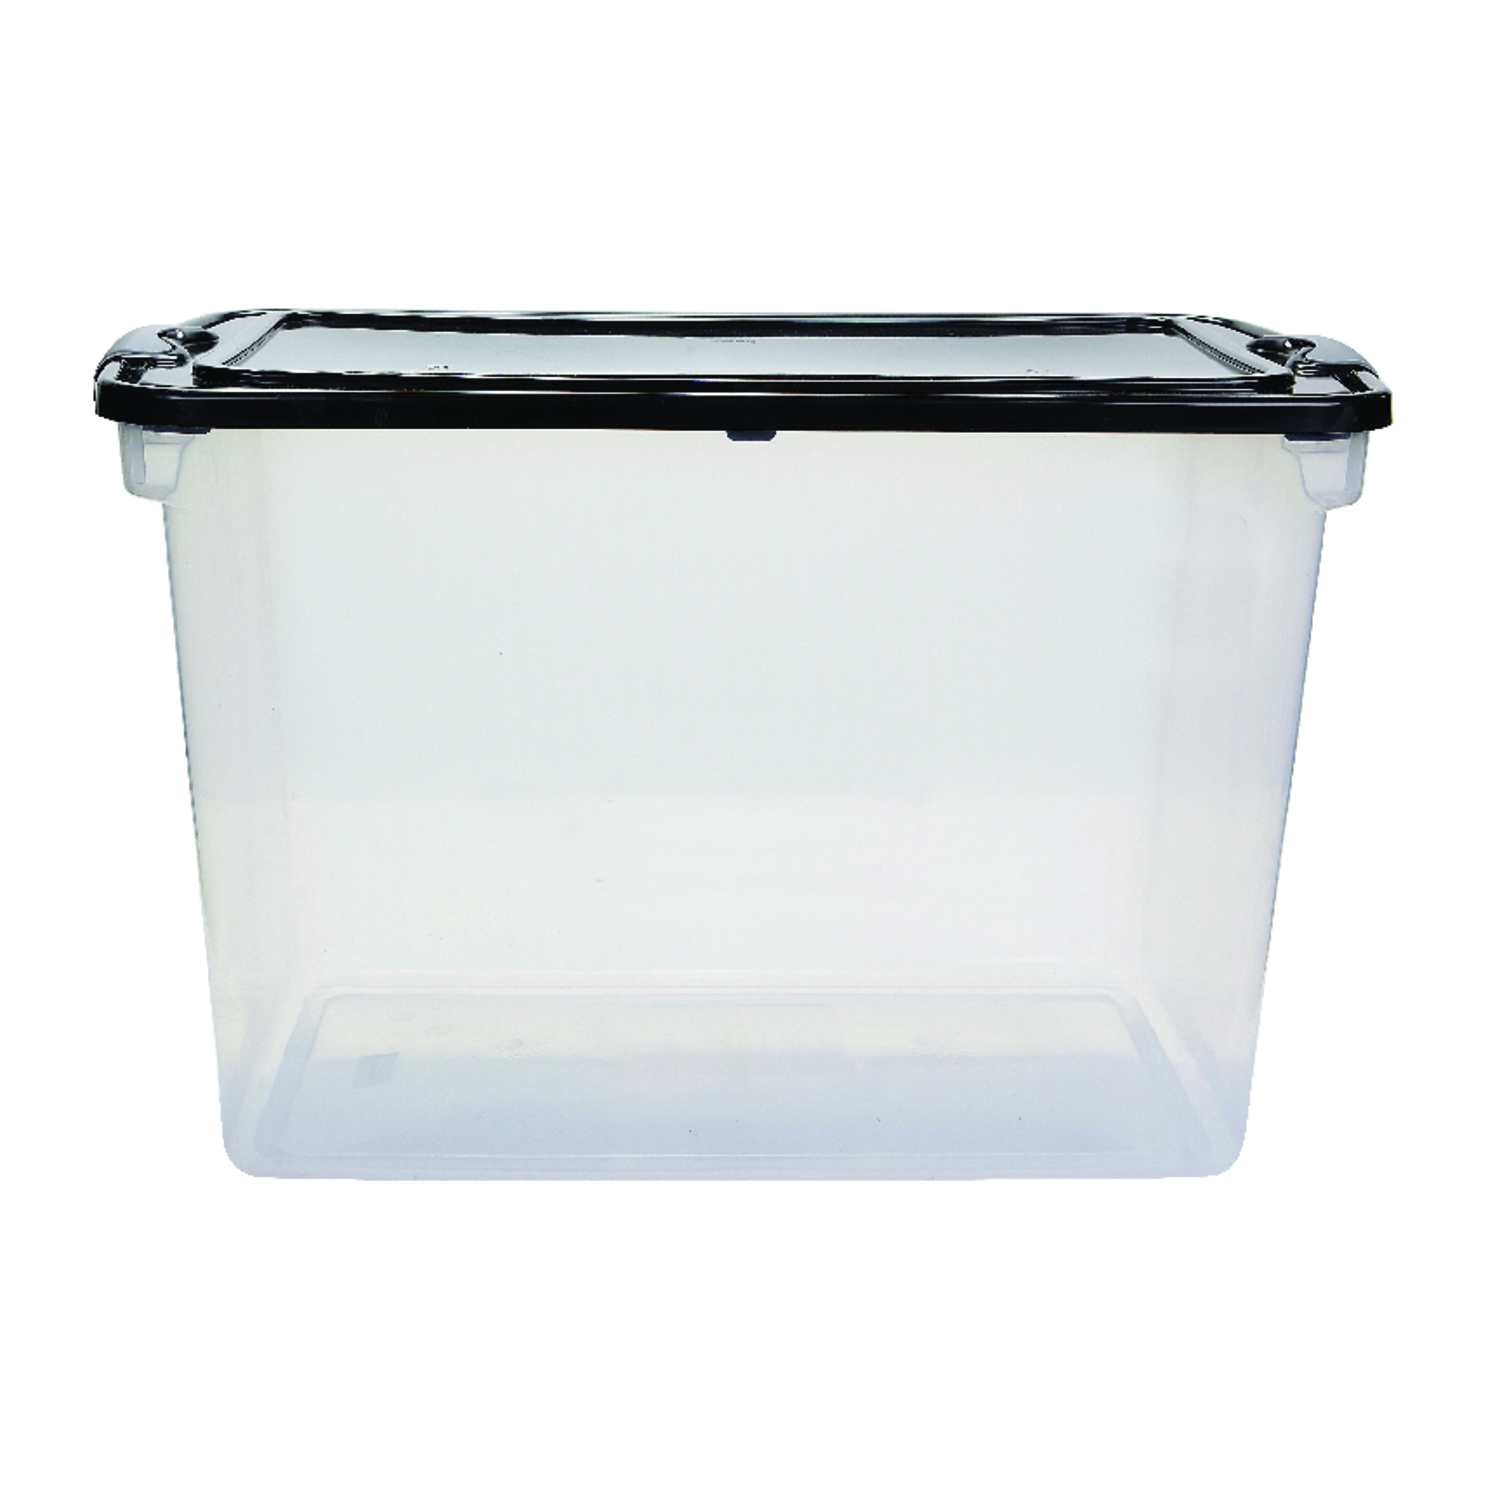 replacement plastic bins for toy organizer